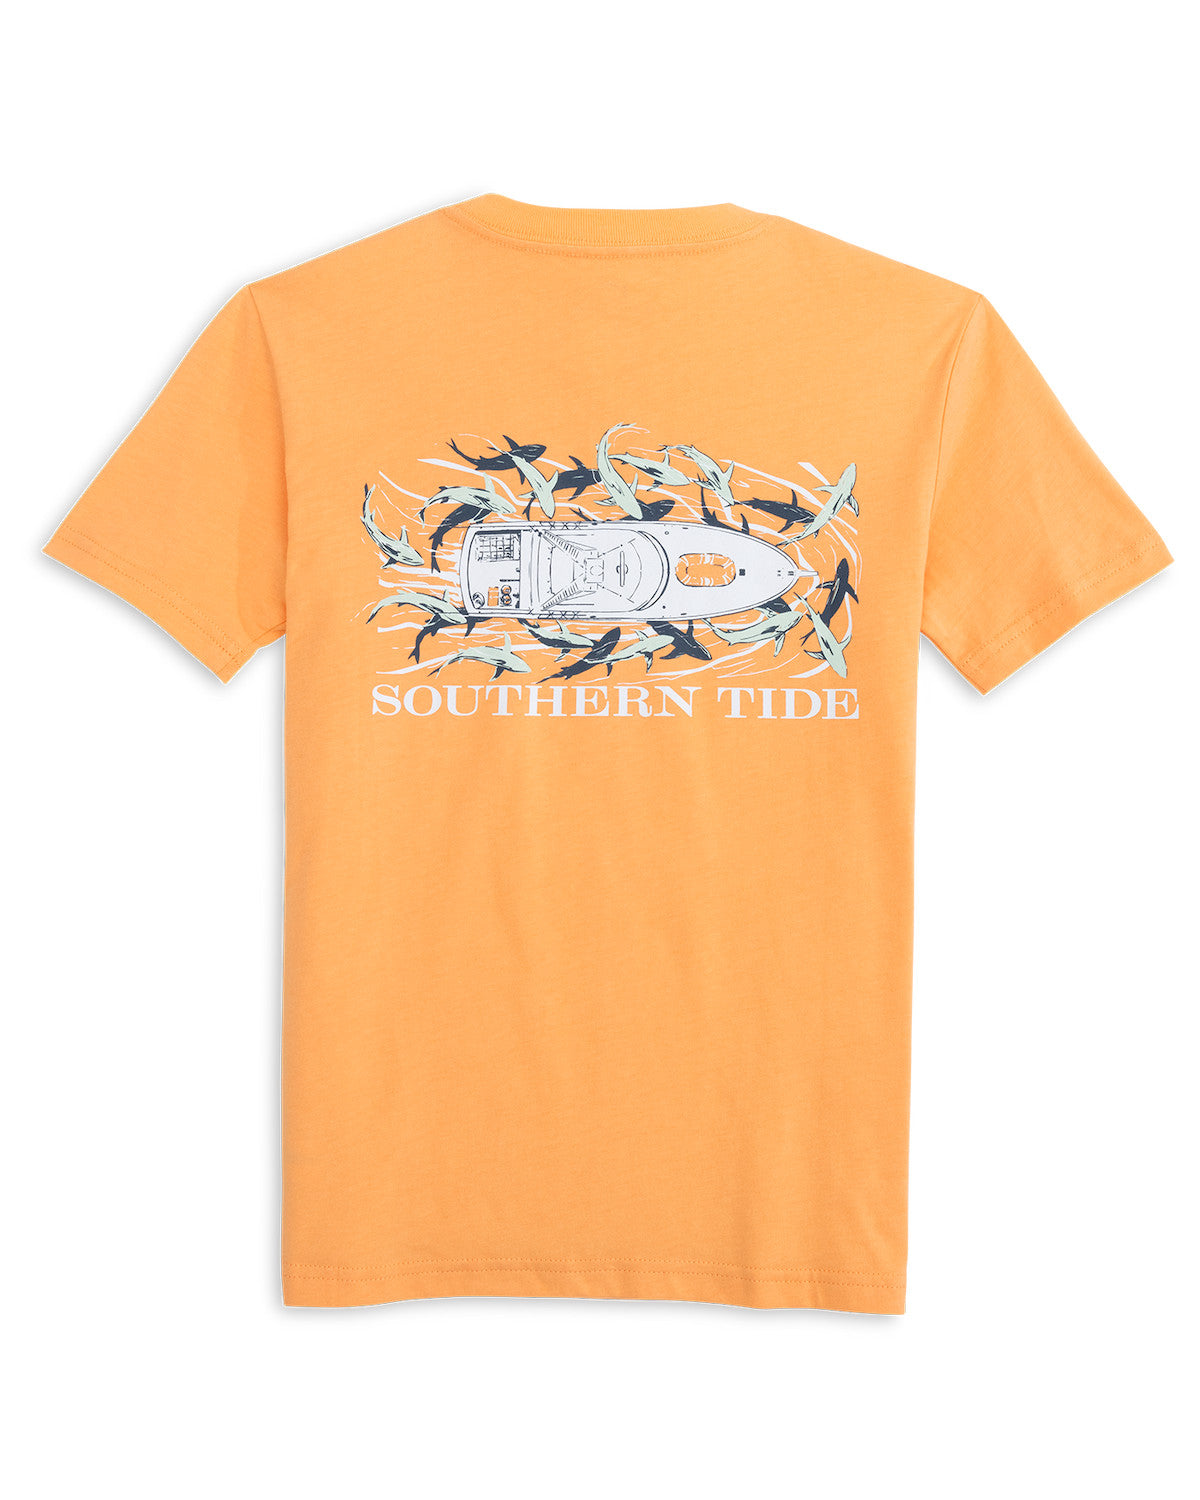 Southern Tide - Youth Yachts of Sharks Tee (Salmon Bluff Orange)